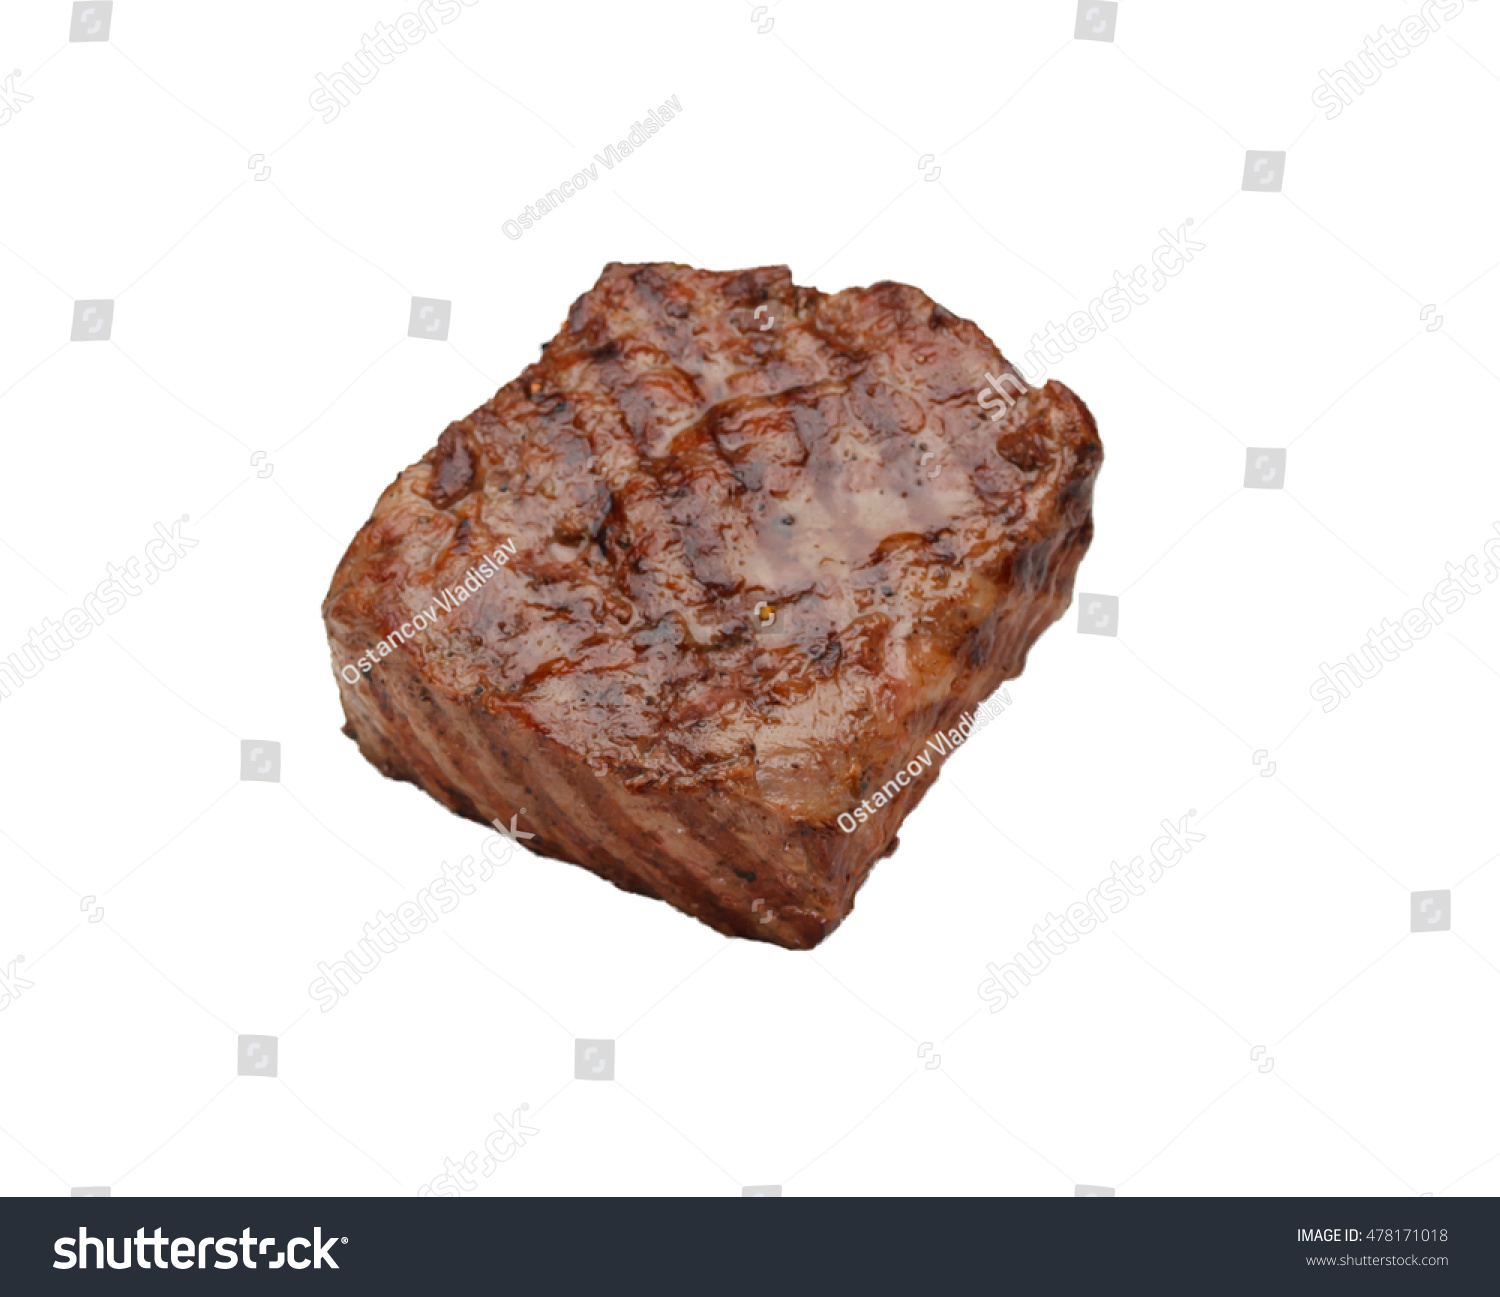 Juicy grilled steak isolated on white background #478171018